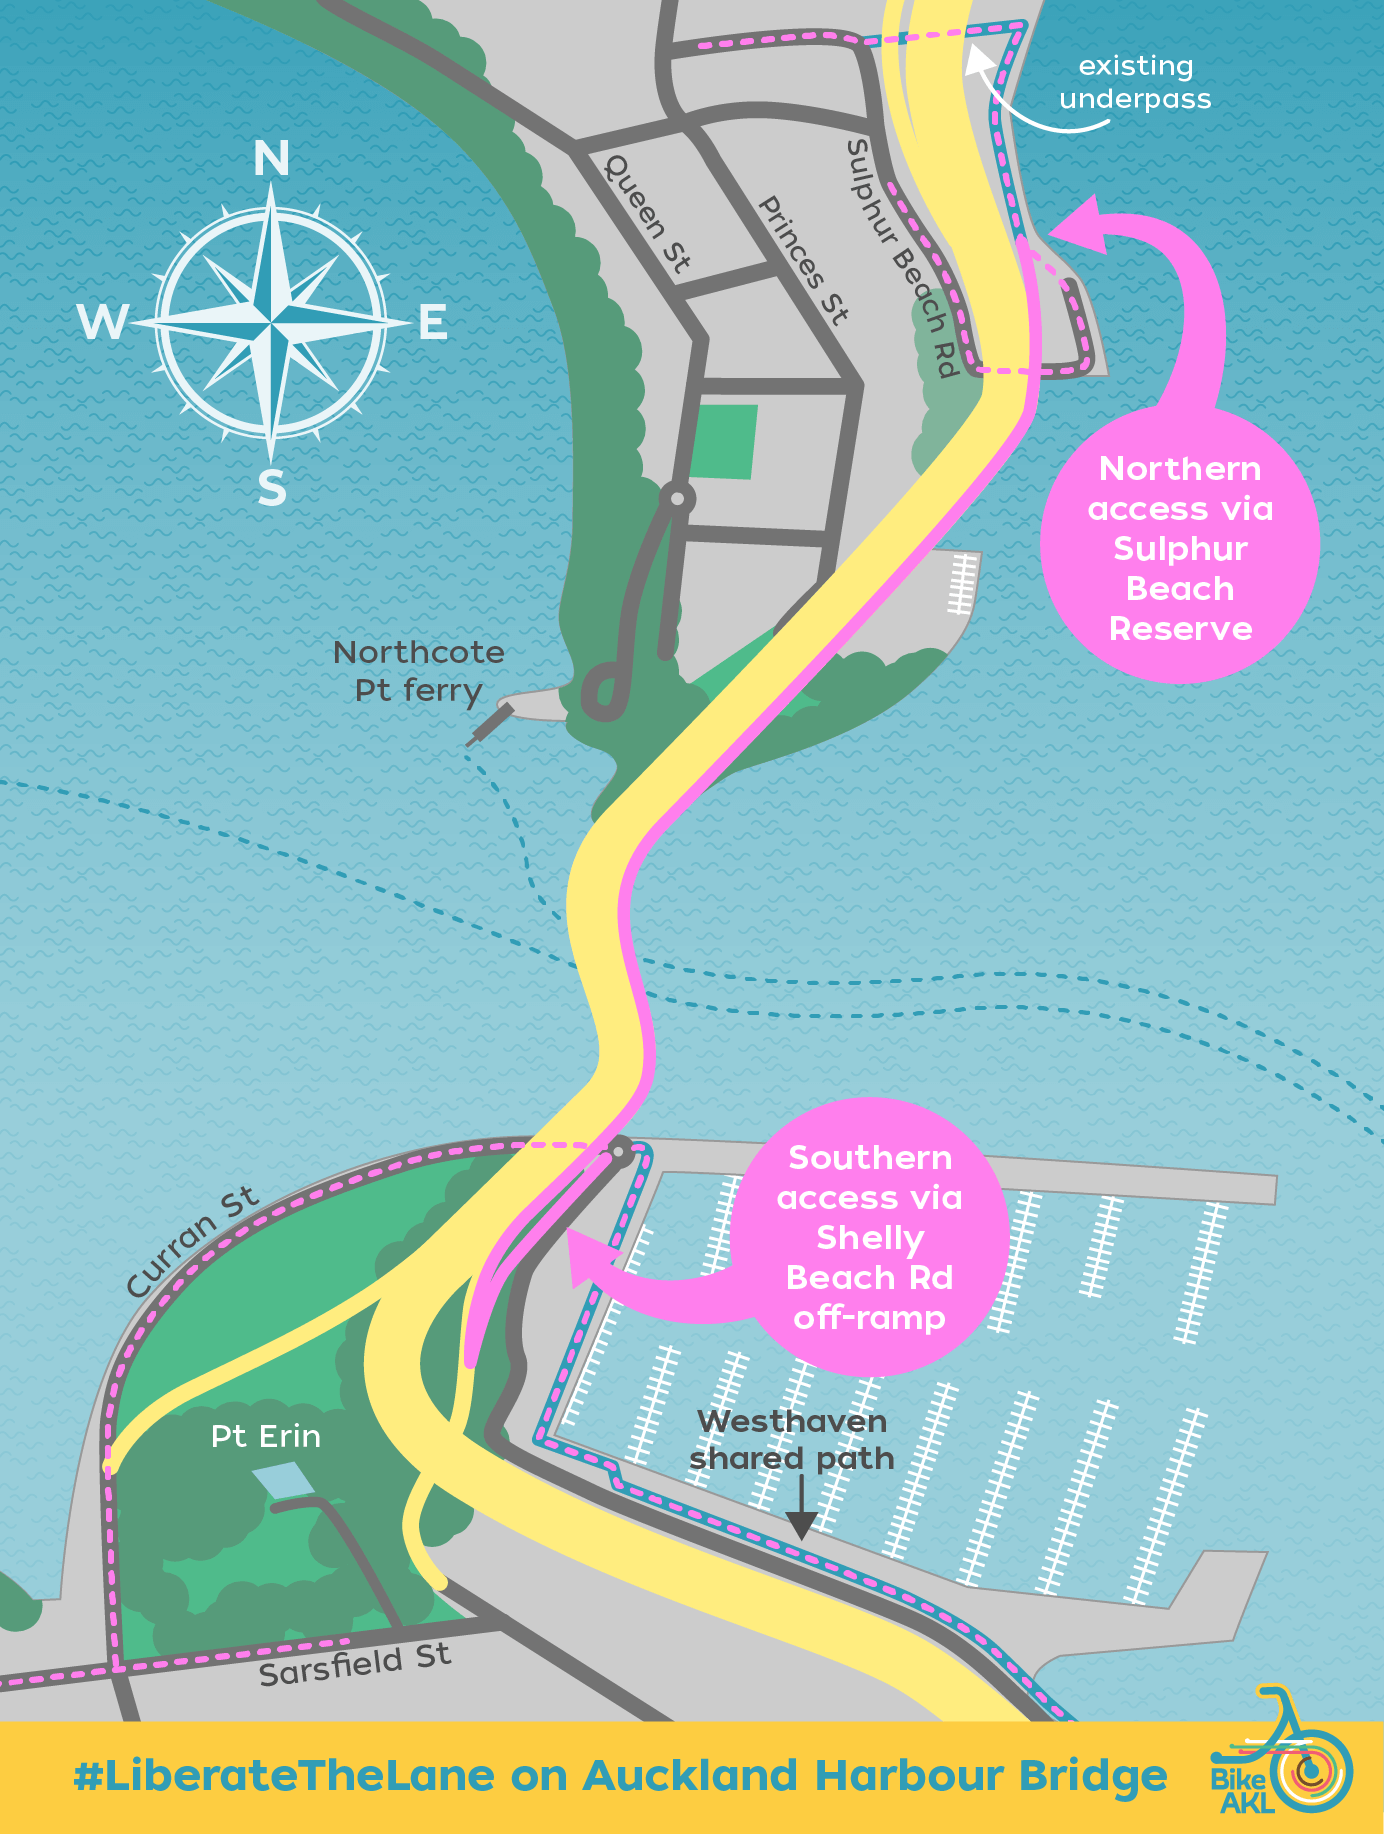 A map showing a pink lane over the Harbour Bridge which connects on the city centre side via the Shelly Beach rd off-ramp, and on the North Shore side via Sulphur Beach Reserve